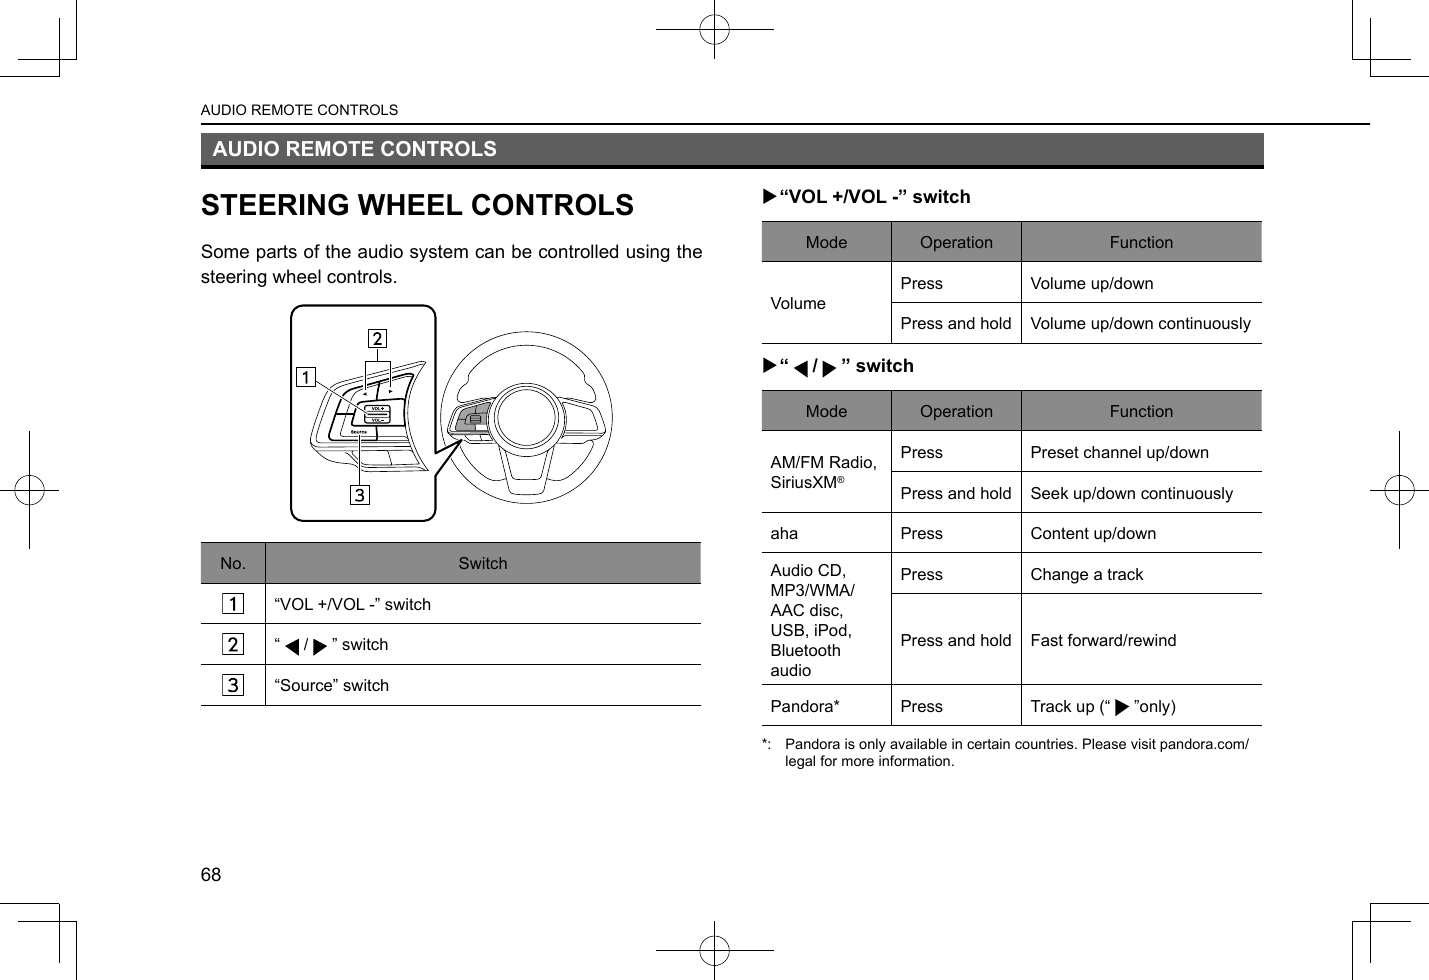 AUDIO REMOTE CONTROLSSTEERING WHEEL CONTROLSSome parts of the audio system can be controlled using the steering wheel controls.No. Switch“VOL +/VOL -” switch“ / ” switch“Source” switch  X“VOL +/VOL -” switchMode Operation FunctionVolumePress Volume up/downPress and hold Volume up/down continuously X“ / ” switchMode Operation FunctionAM/FM Radio, SiriusXM®Press Preset channel up/downPress and hold Seek up/down continuouslyaha Press Content up/downAudio CD,MP3/WMA/AAC disc,USB, iPod, Bluetooth audioPress Change a trackPress and hold Fast forward/rewindPandora* Press Track up (“ ”only)*:  Pandora is only available in certain countries. Please visit pandora.com/legal for more information.AUDIO REMOTE CONTROLS68